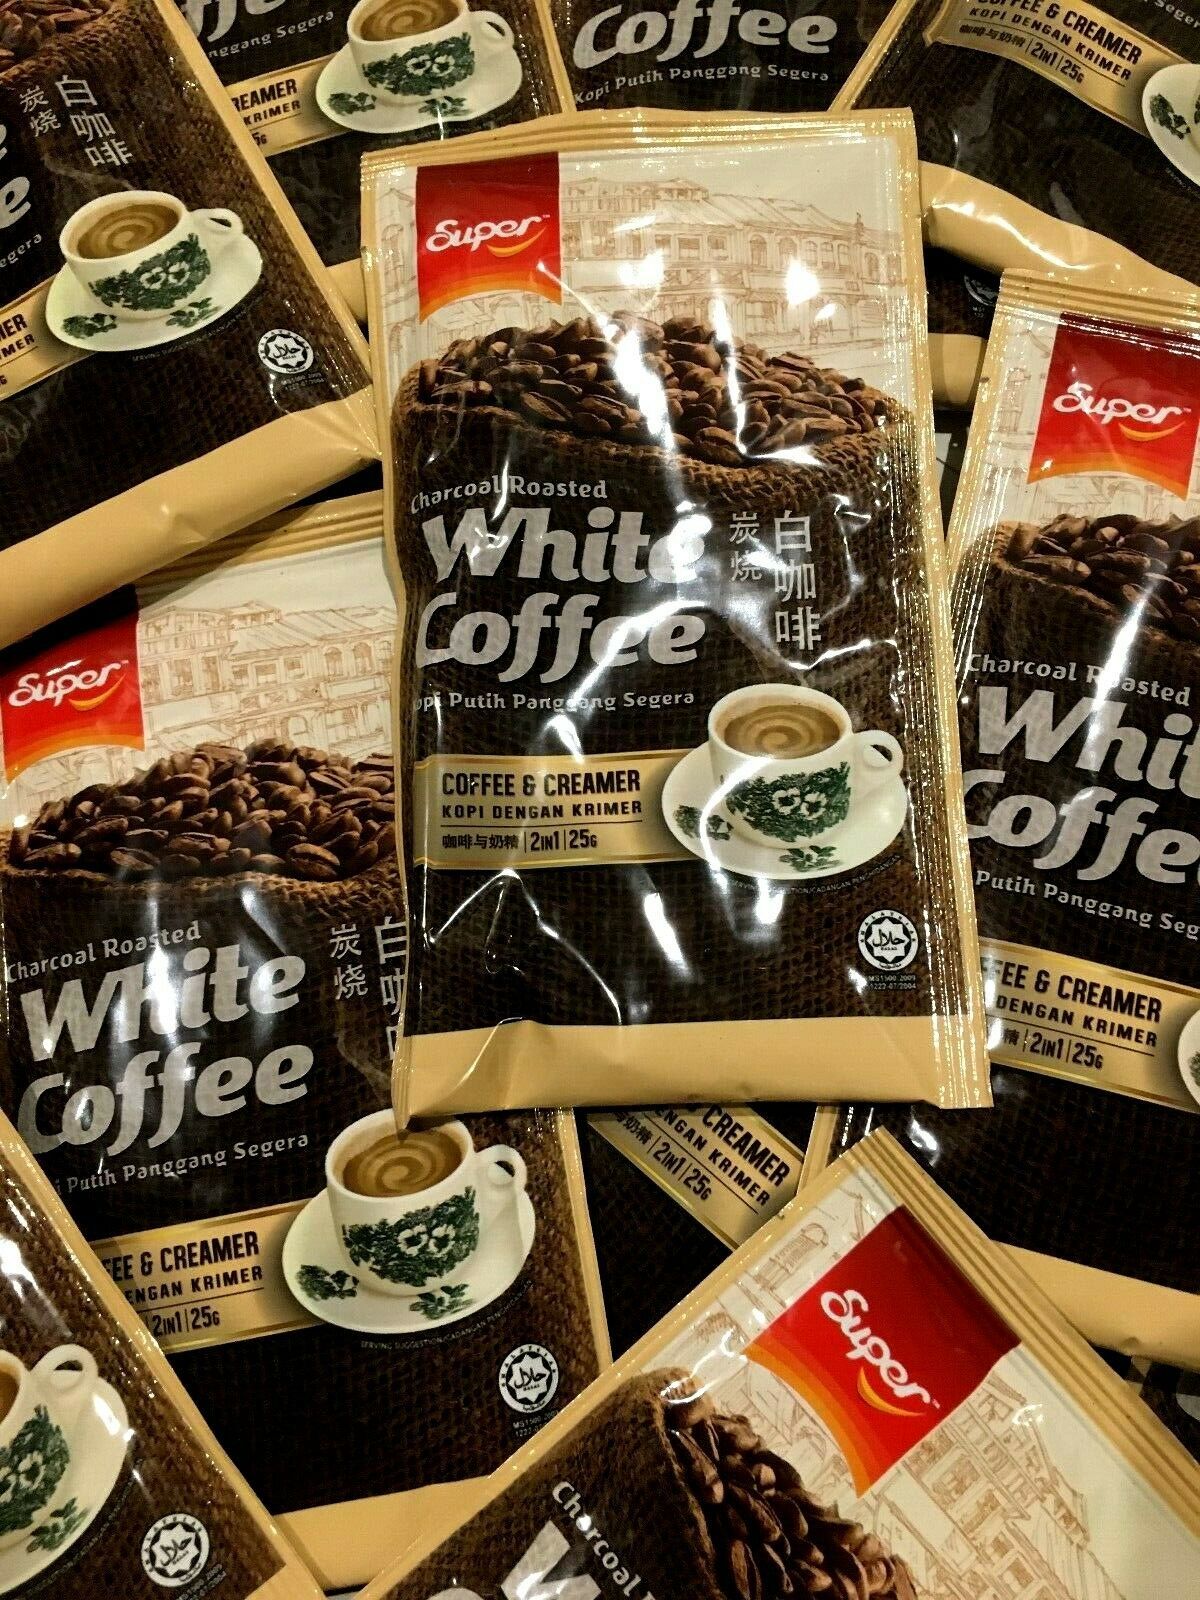 2 in 1 coffee sachets